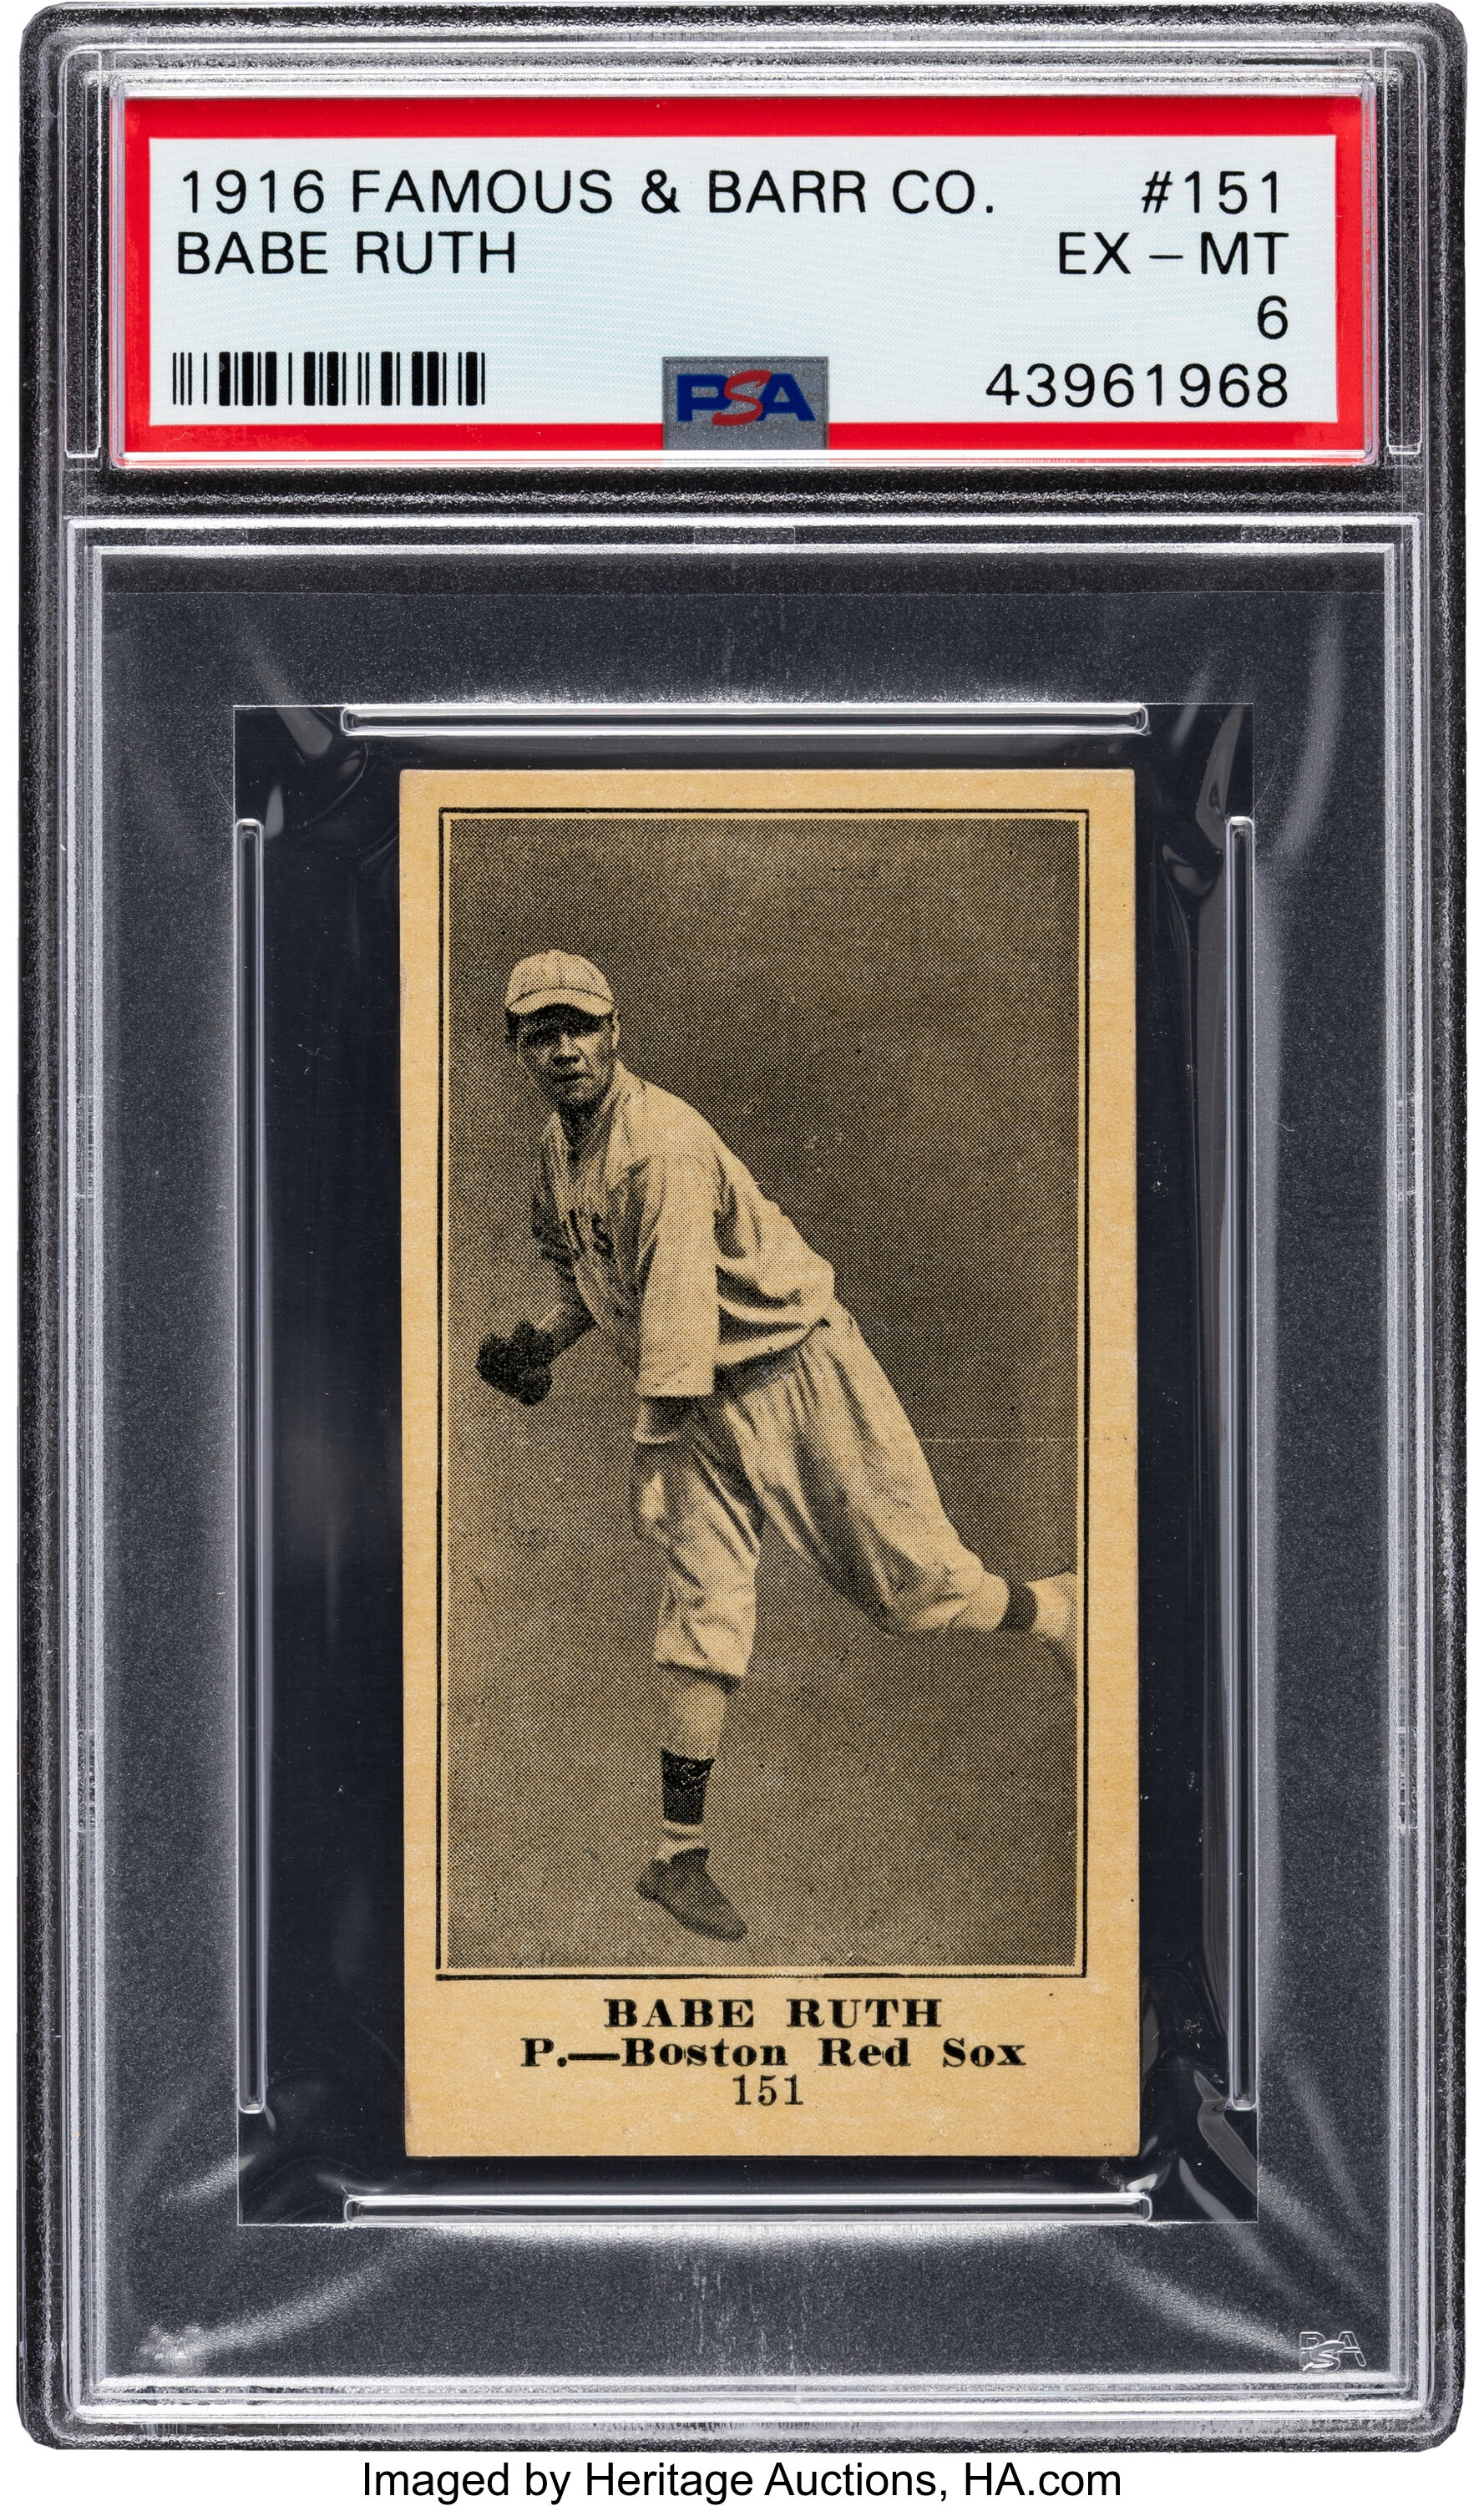 1916 Famous & Barr Co. Babe Ruth #151 PSA EX-MT 6 - The Hobby's, Lot  #56008